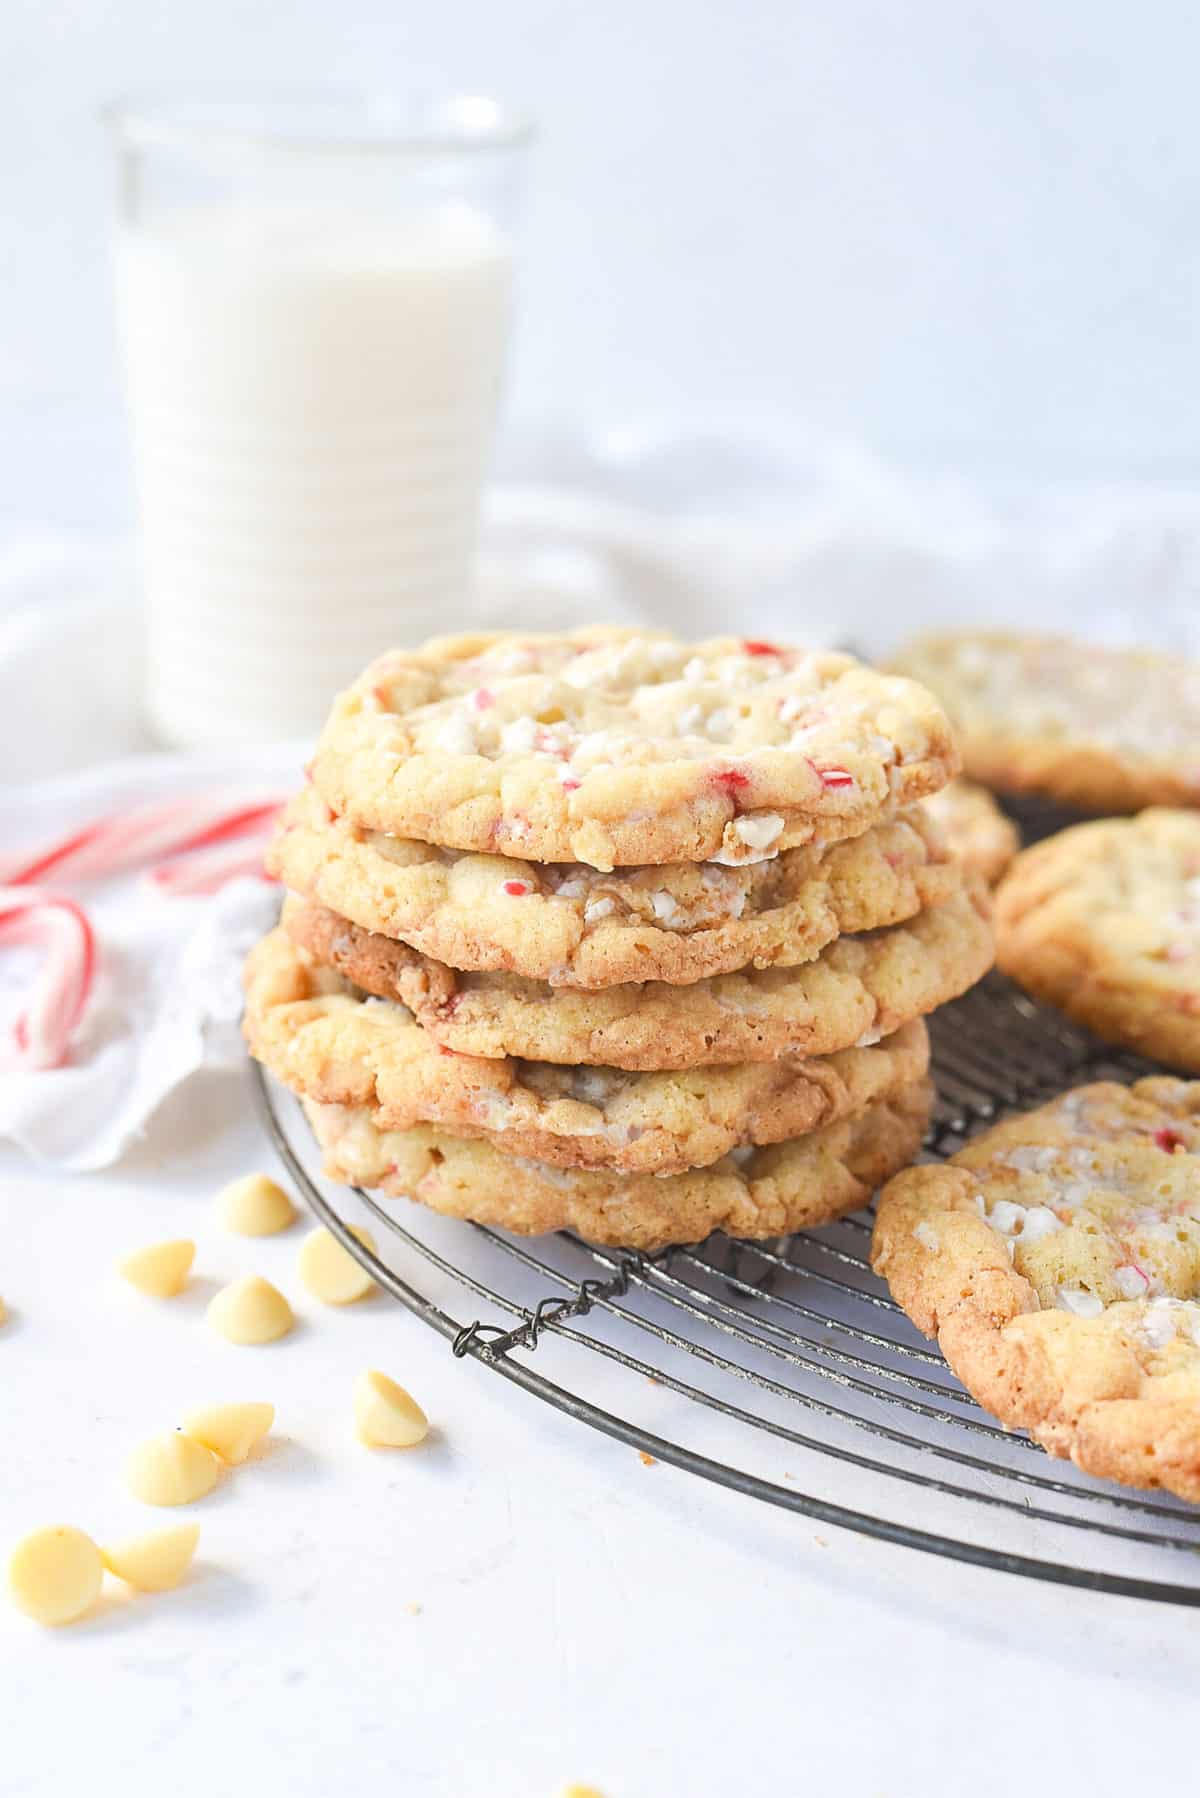 stack of white chocolate peppermint cookies